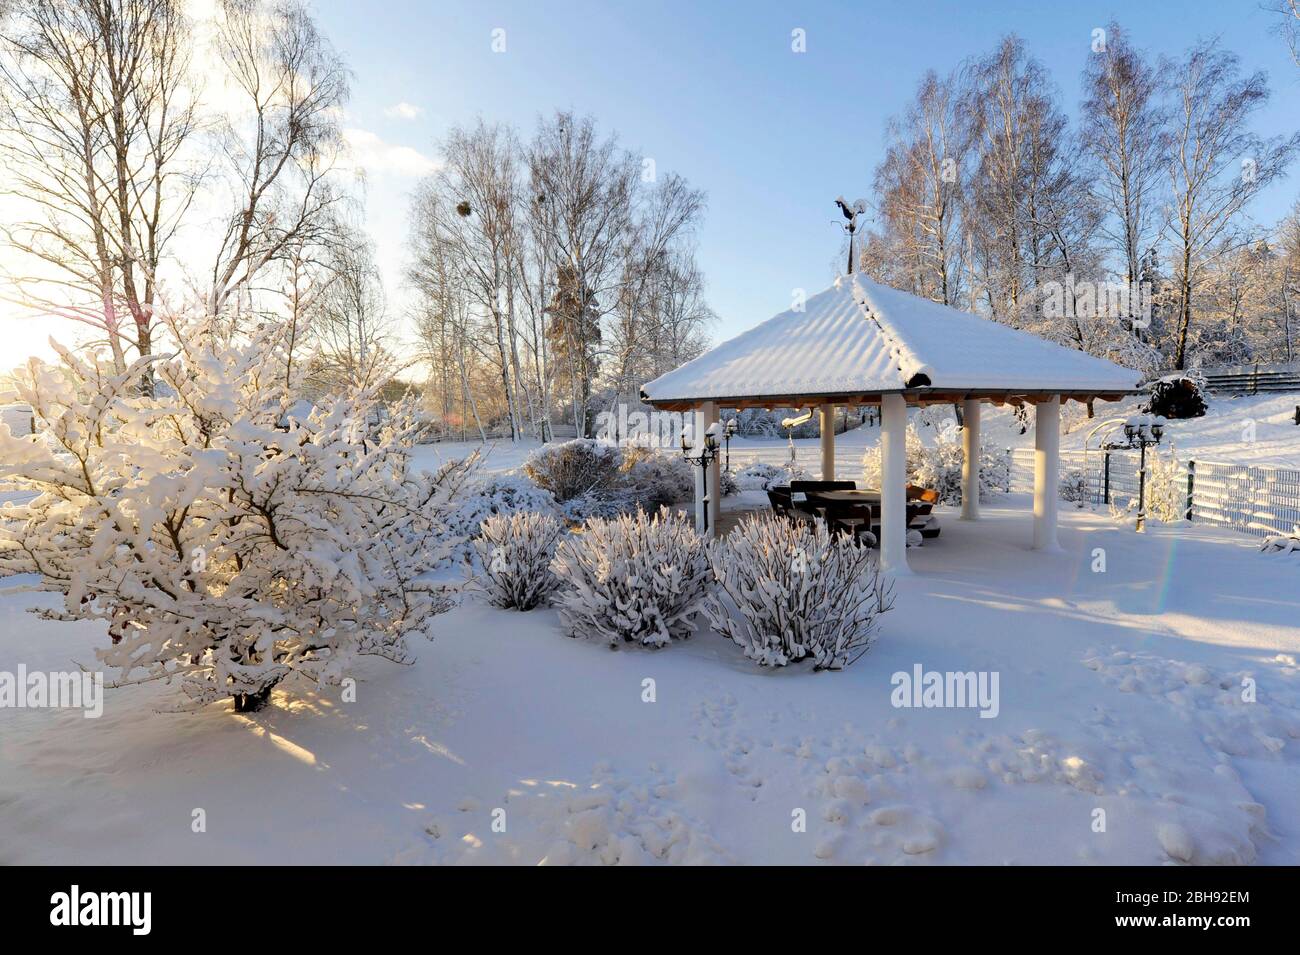 Snow-covered garden with gazebo and sitting area in hibernation Stock Photo